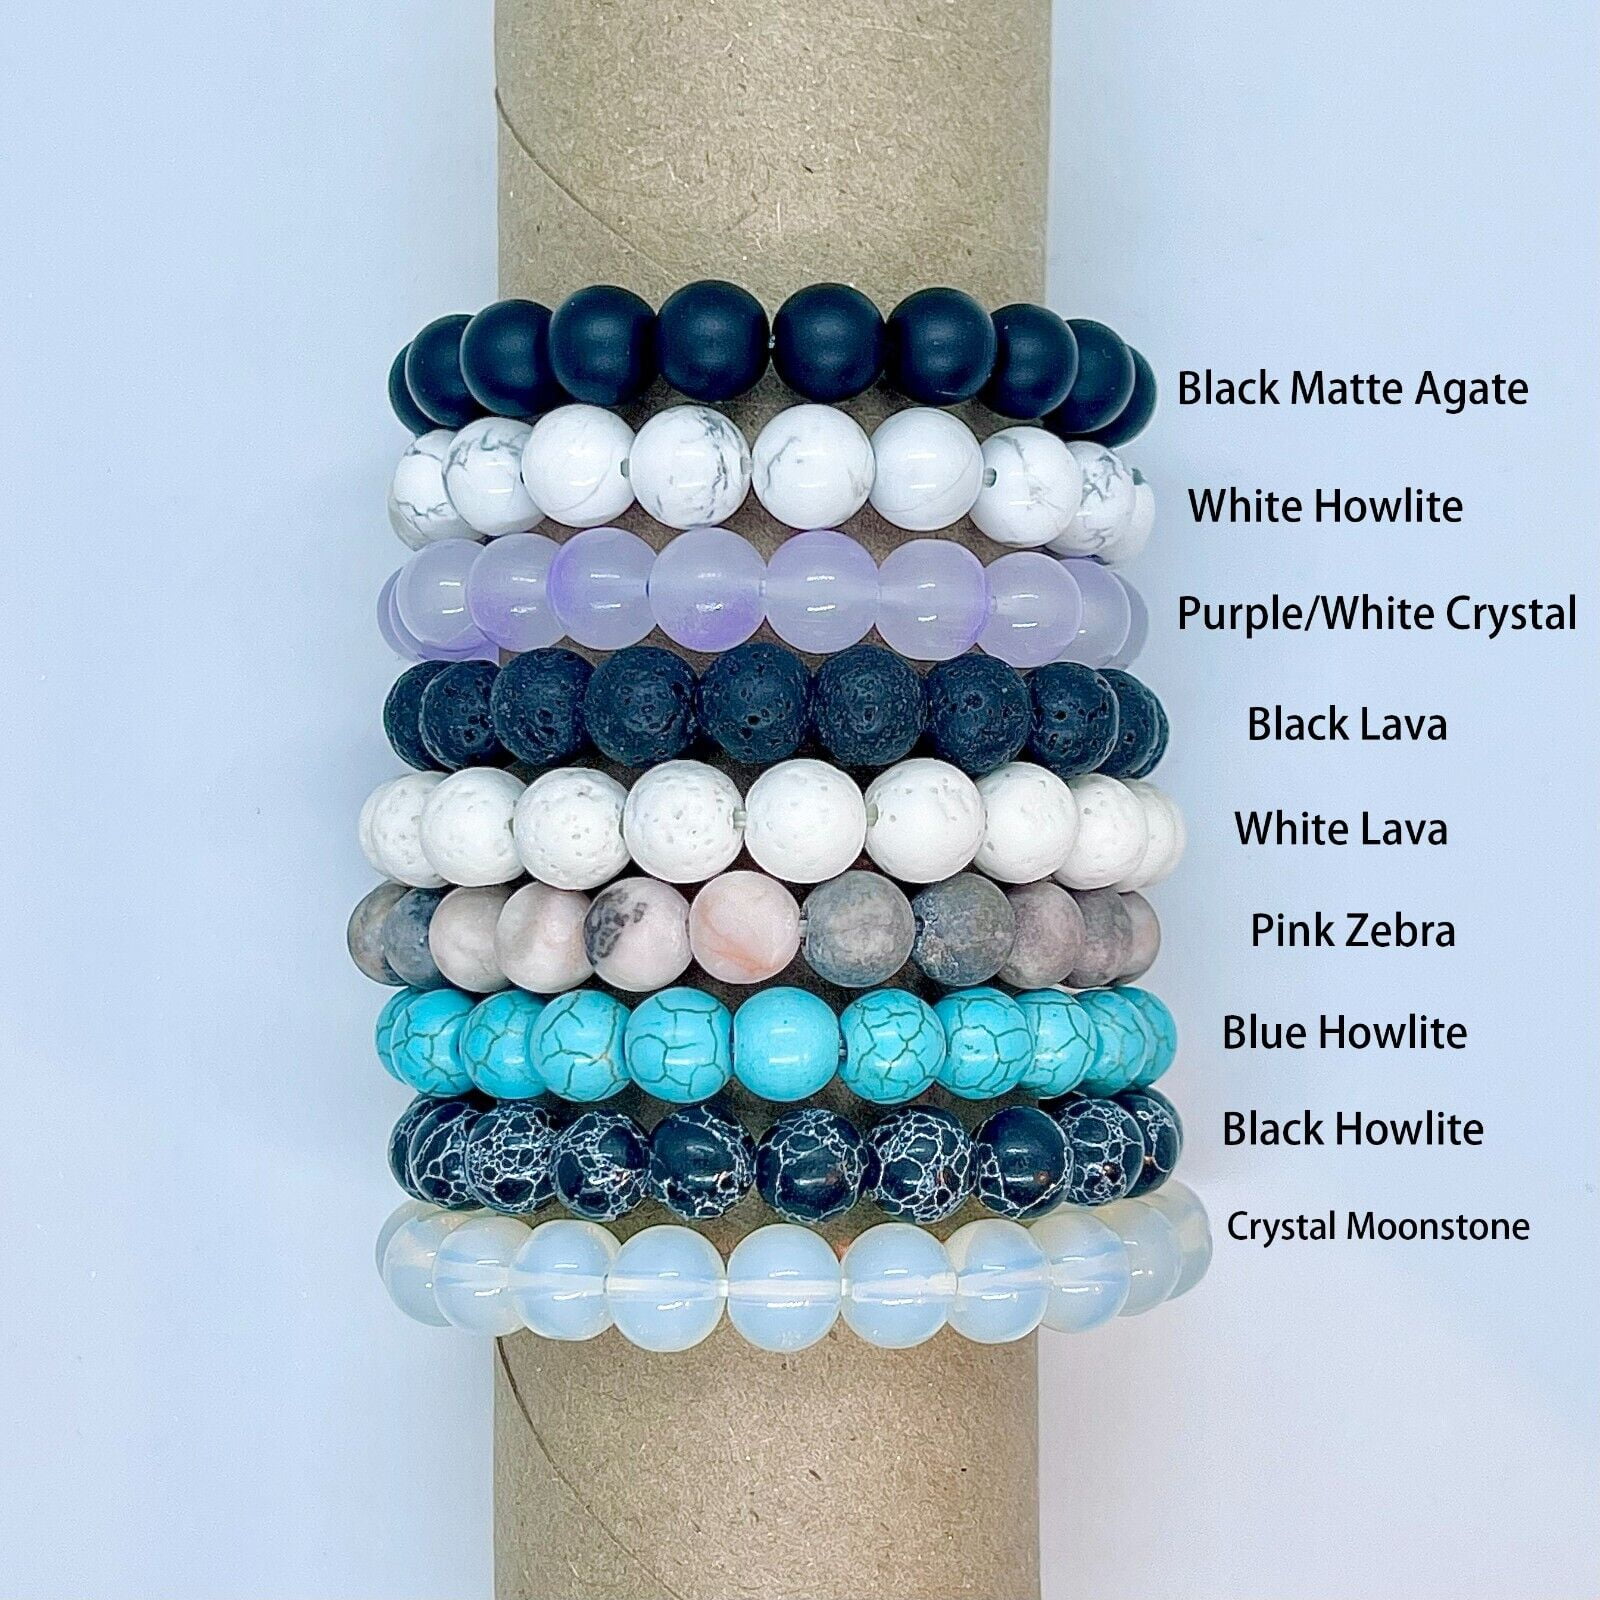 White Howlite Lava Stone Diffuser Bracelet – Scents Of Wellbeing